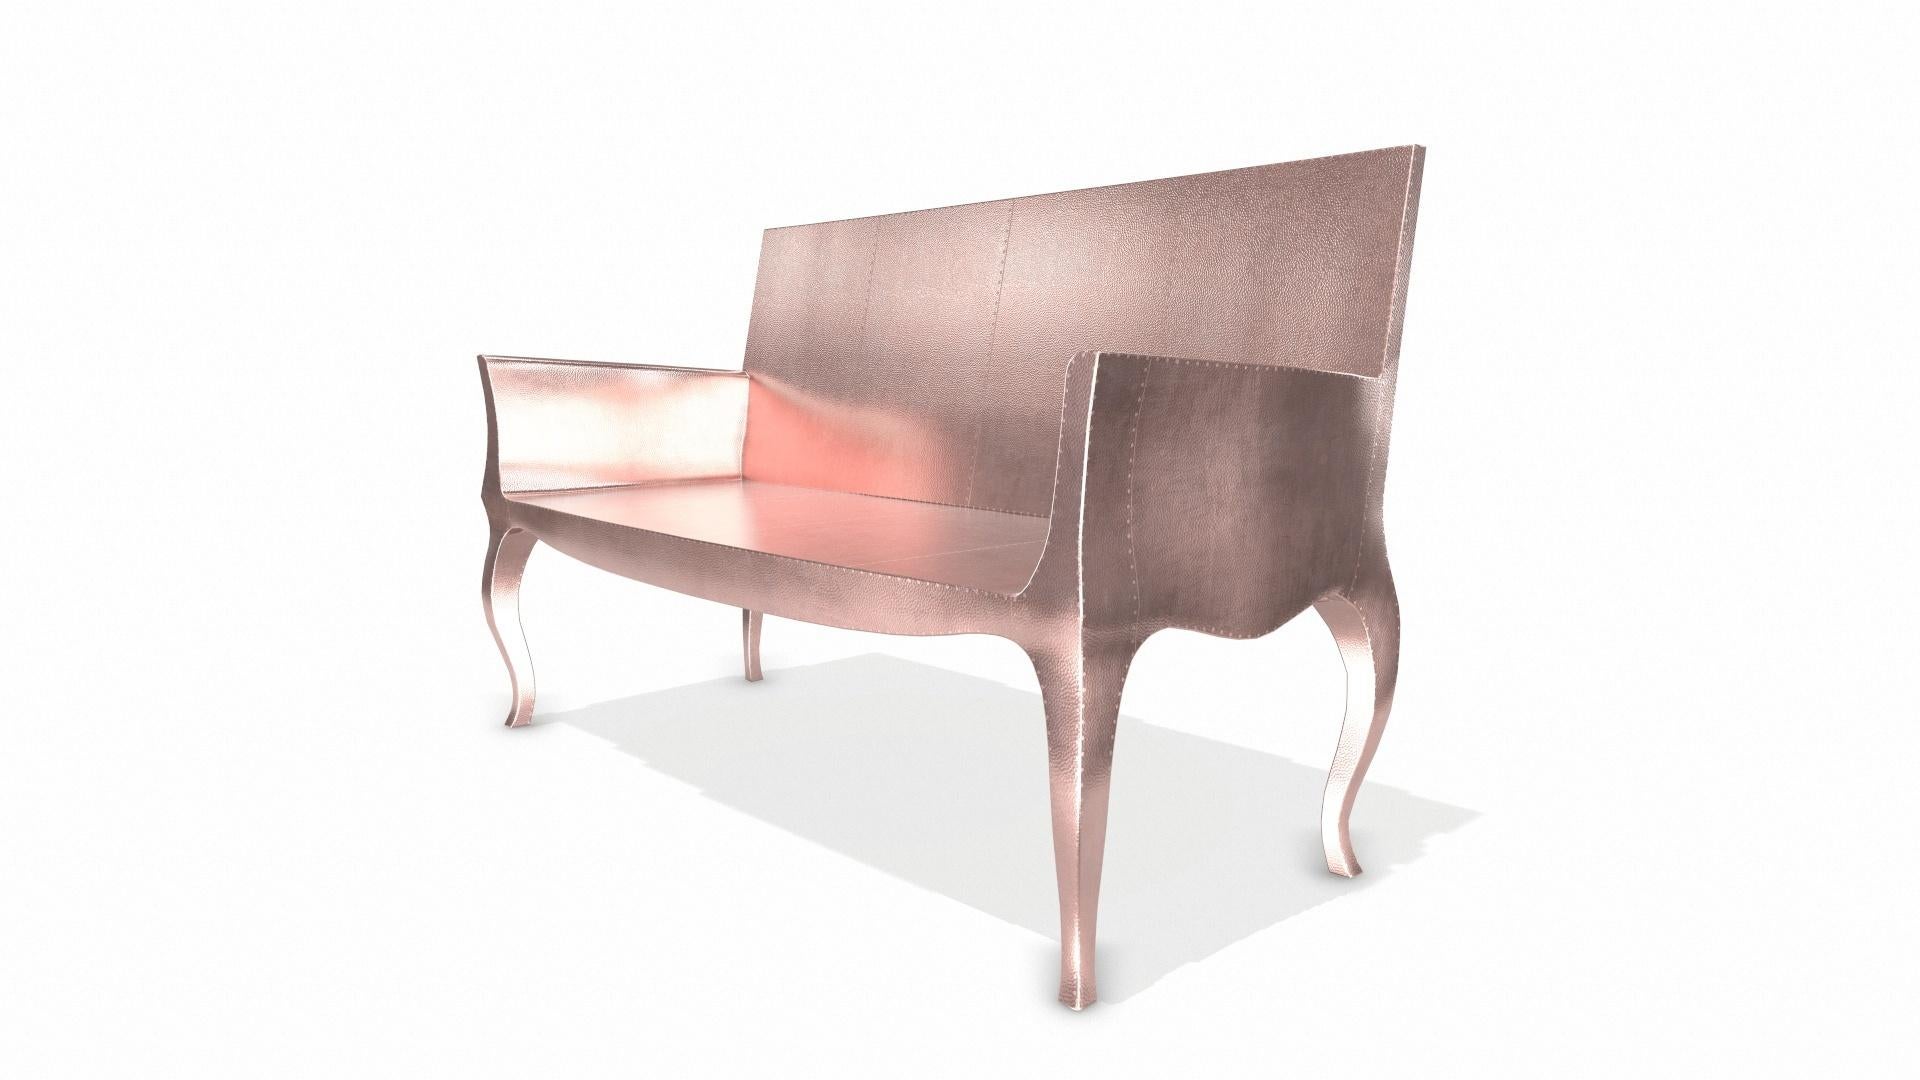 Hand-Crafted Louise Settee Art Deco Settees in Mid. Hammered Copper by Paul Mathieu For Sale